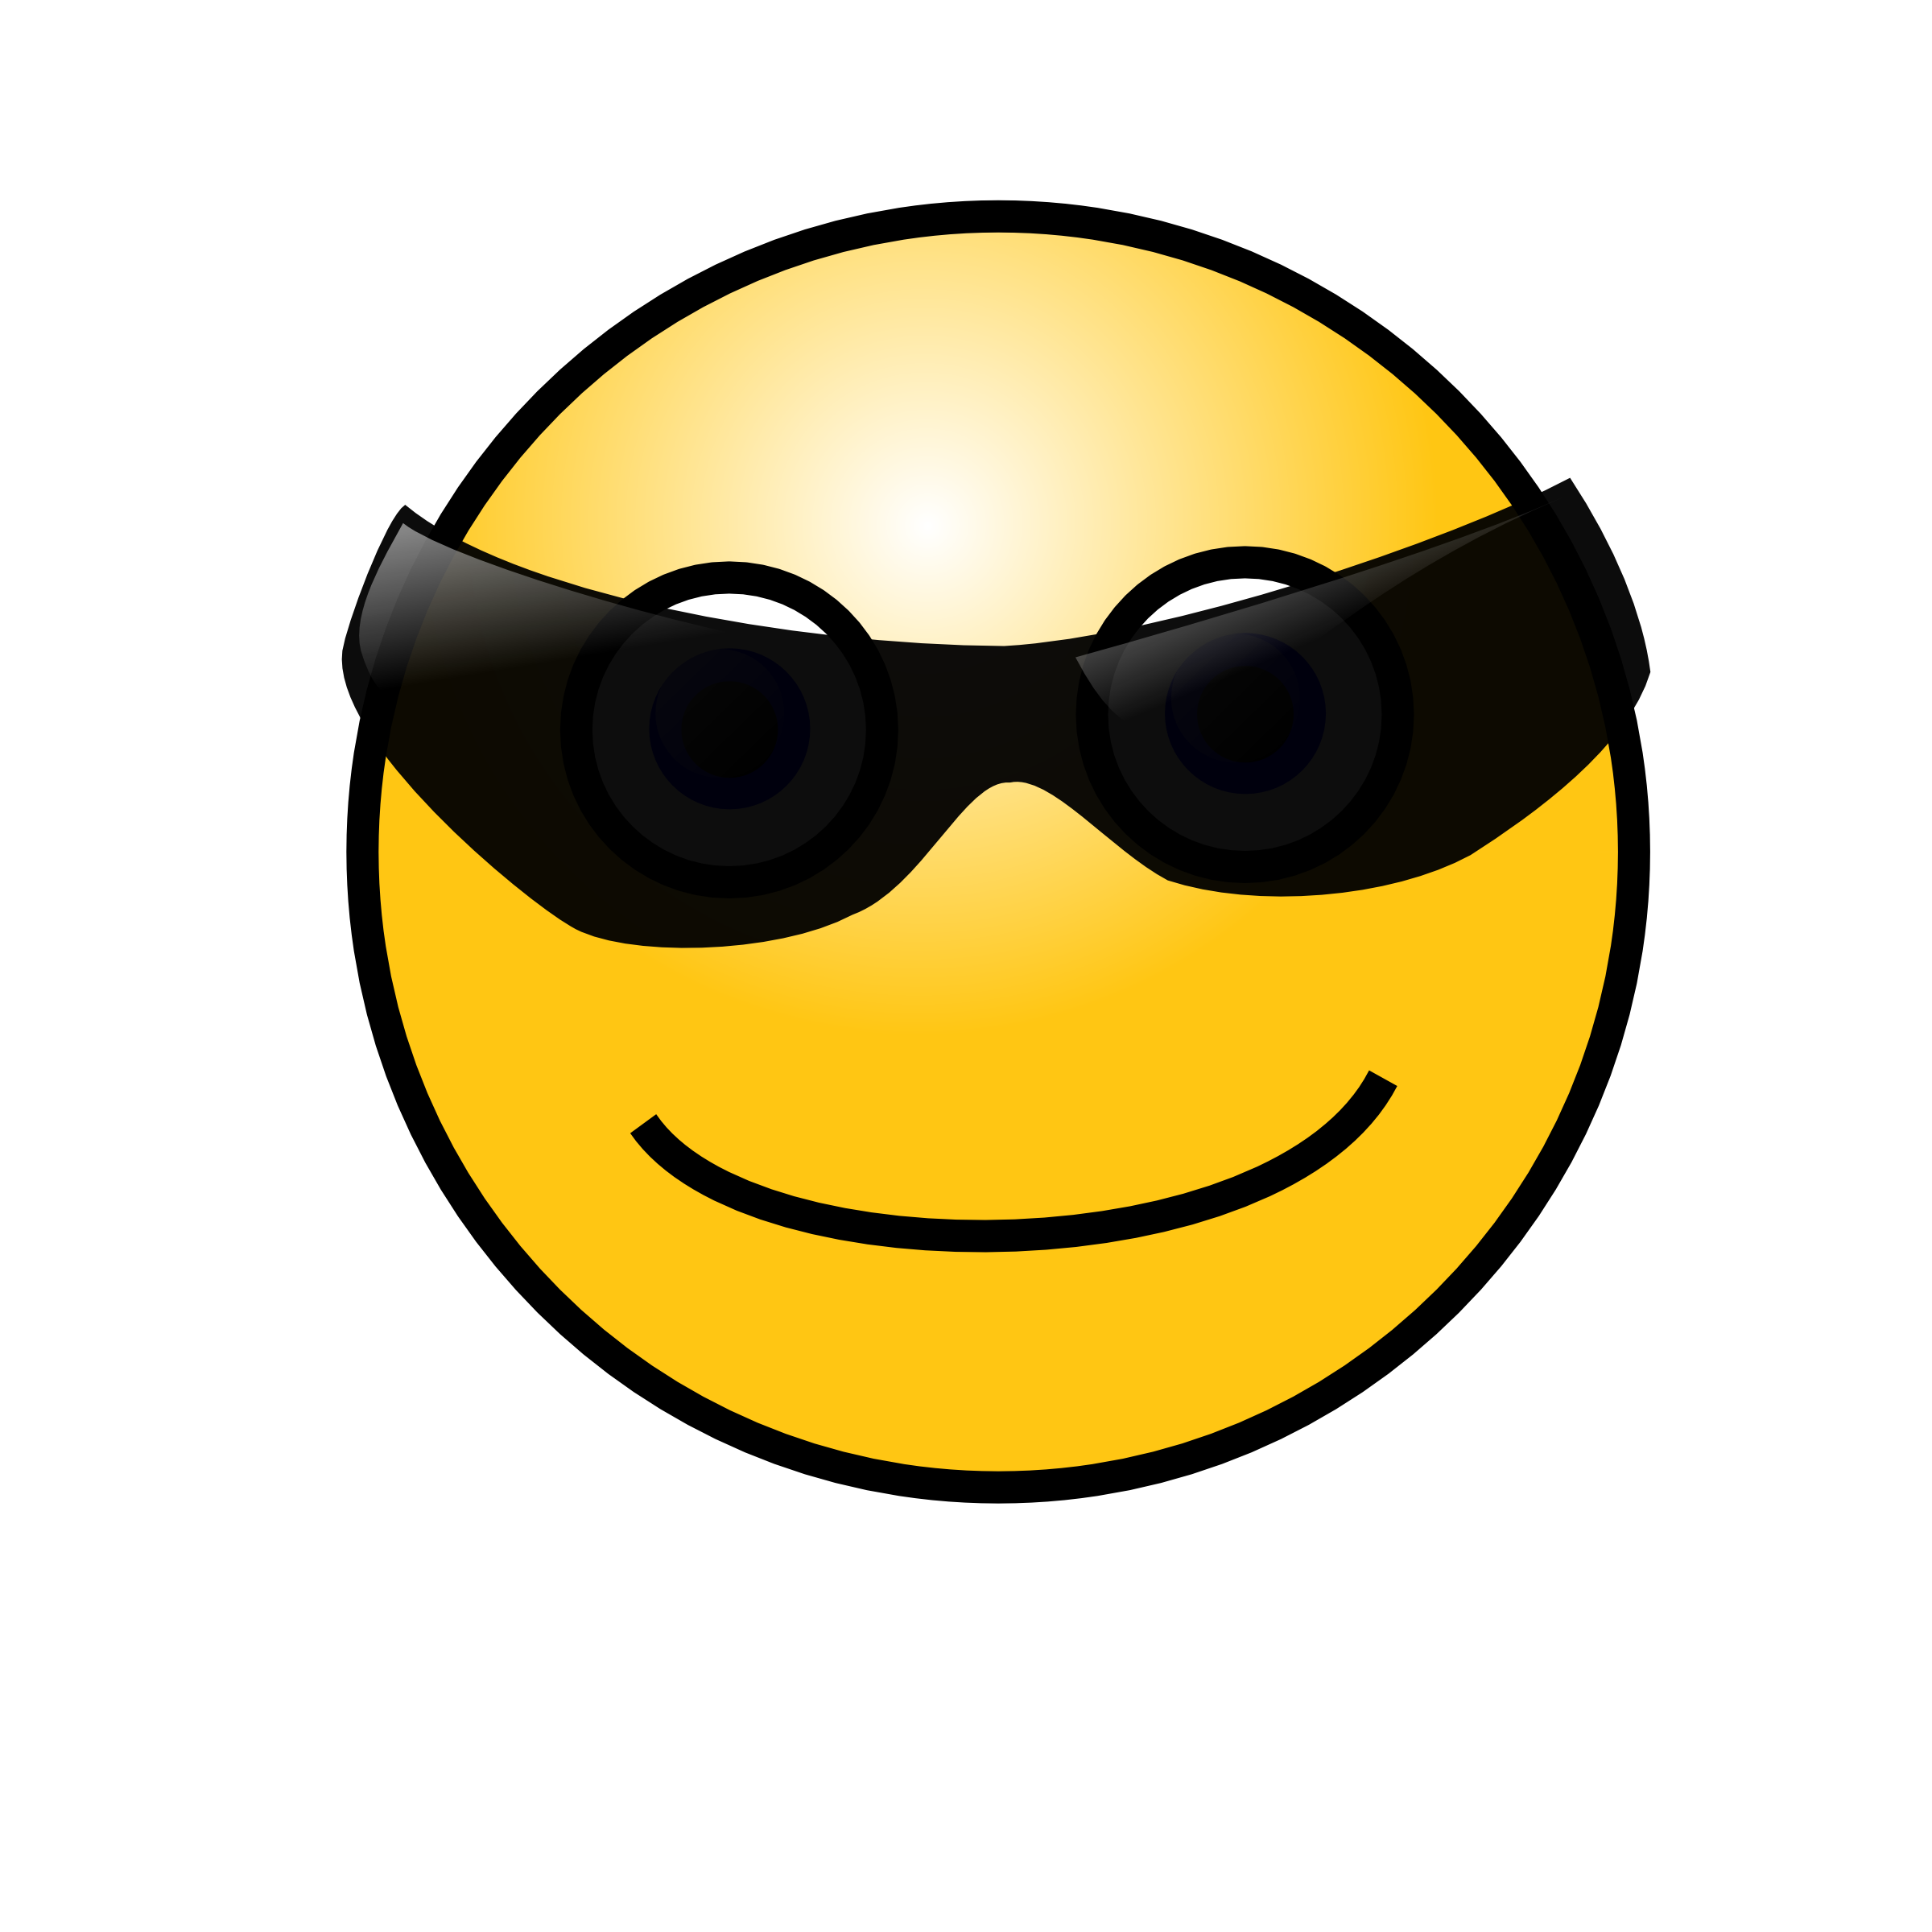 Smiley Sunglasses - ClipArt Best - Smiley Face with Shades